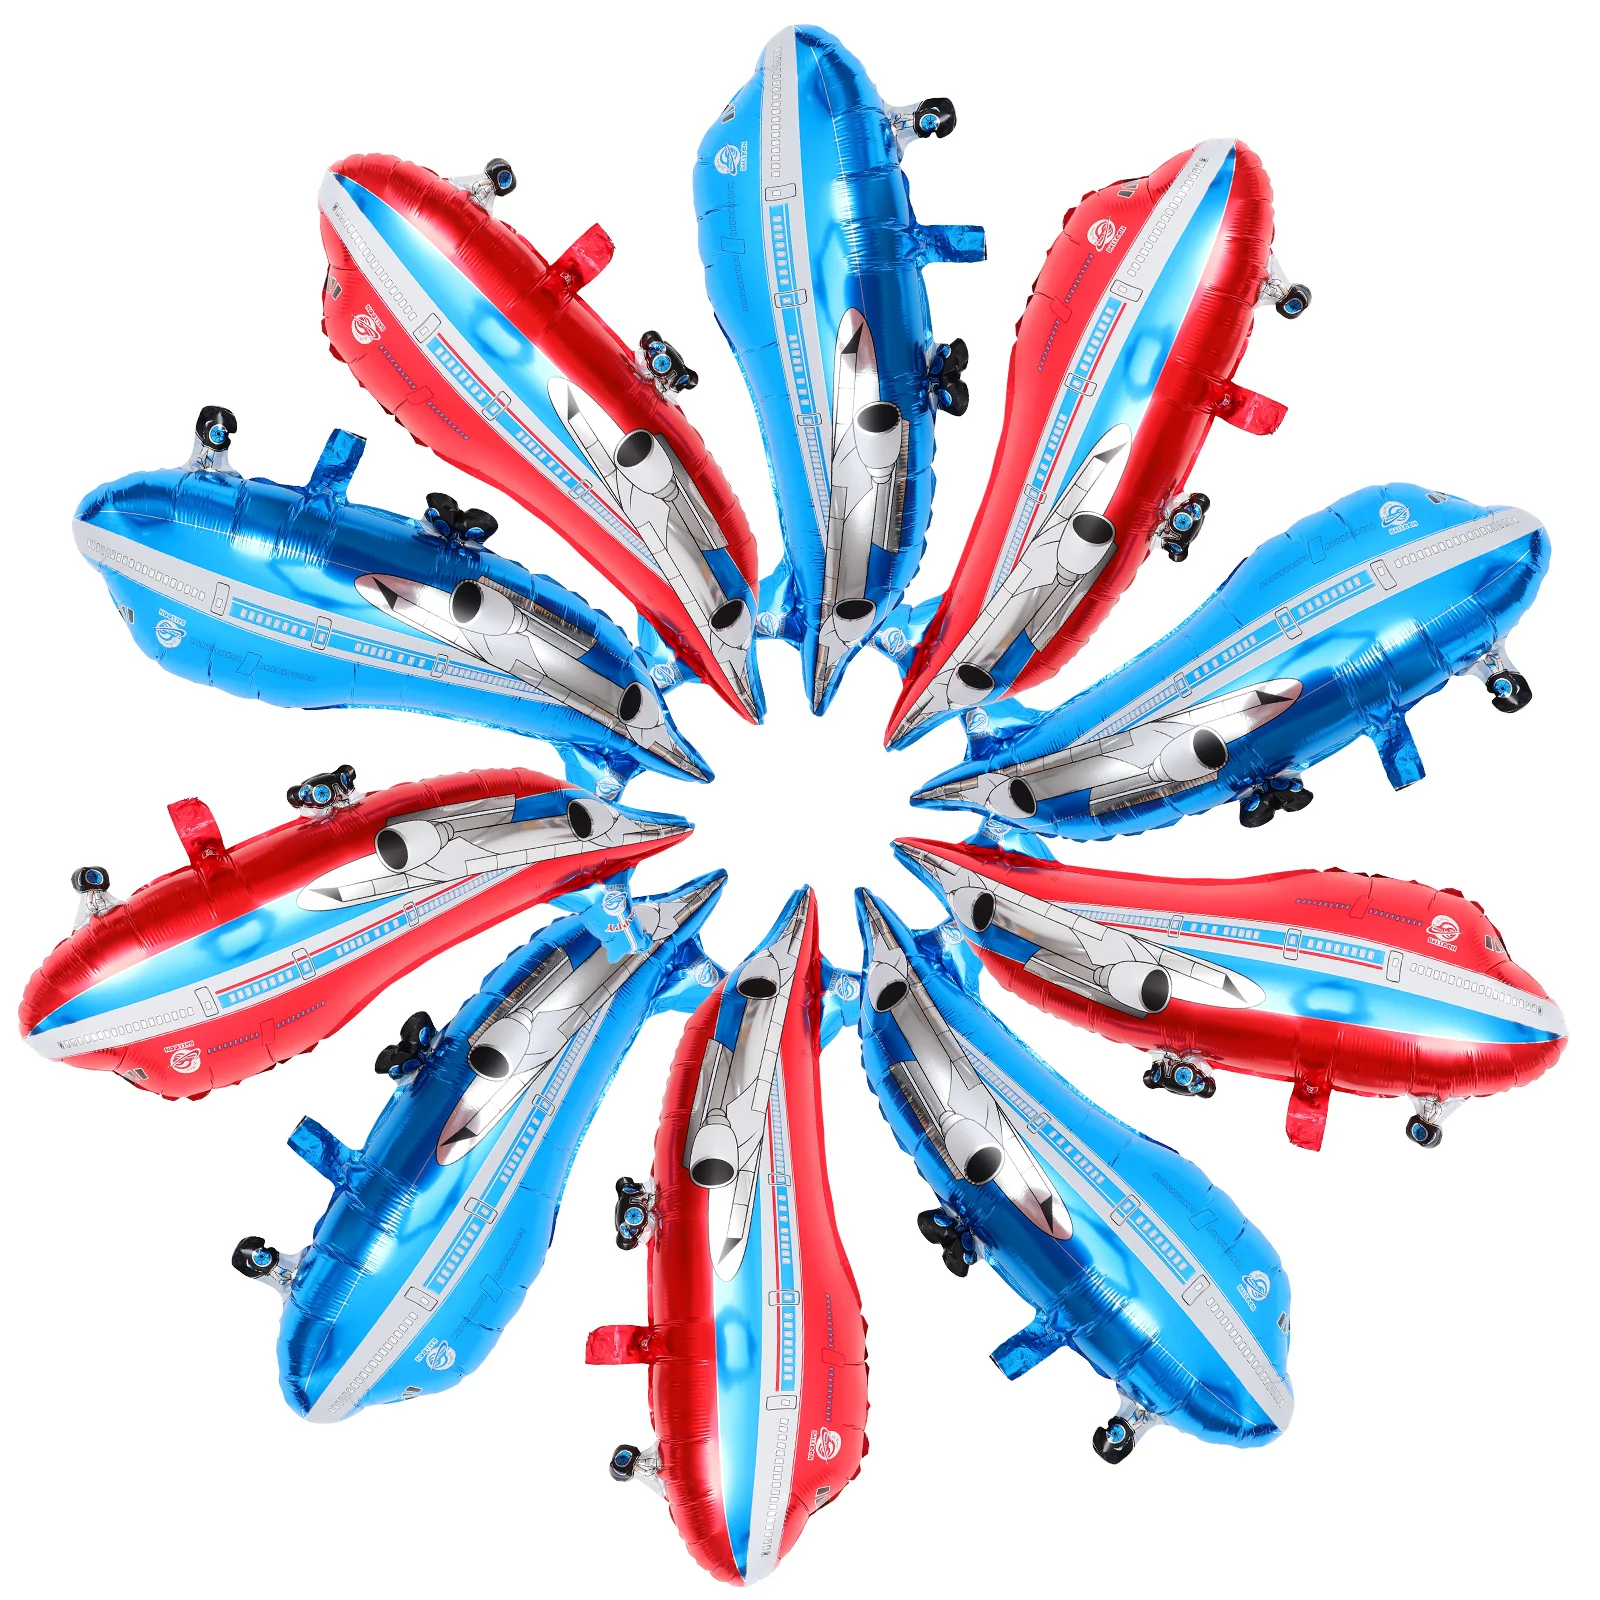 

10pcs Airplane Helicopter Foil Balloon Plane Balloons Photo Props Airplane Themed Party Supplies Birthday Party Gifts ( Blue